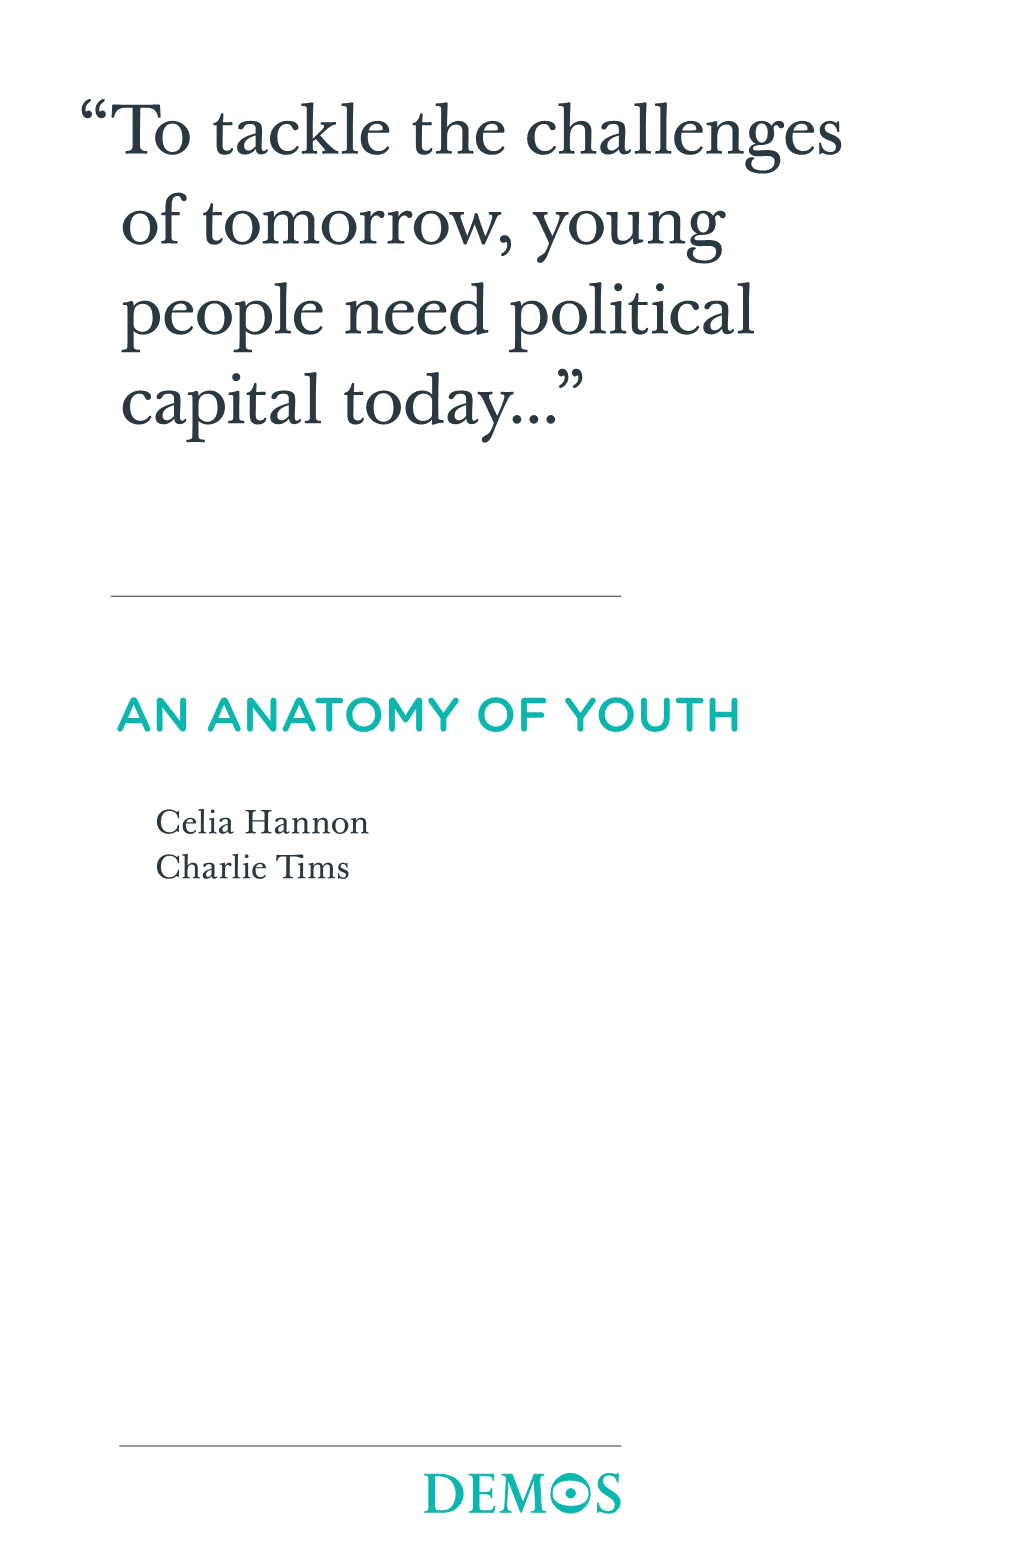 “To Tackle the Challenges of Tomorrow, Young People Need Political Capital Today...”